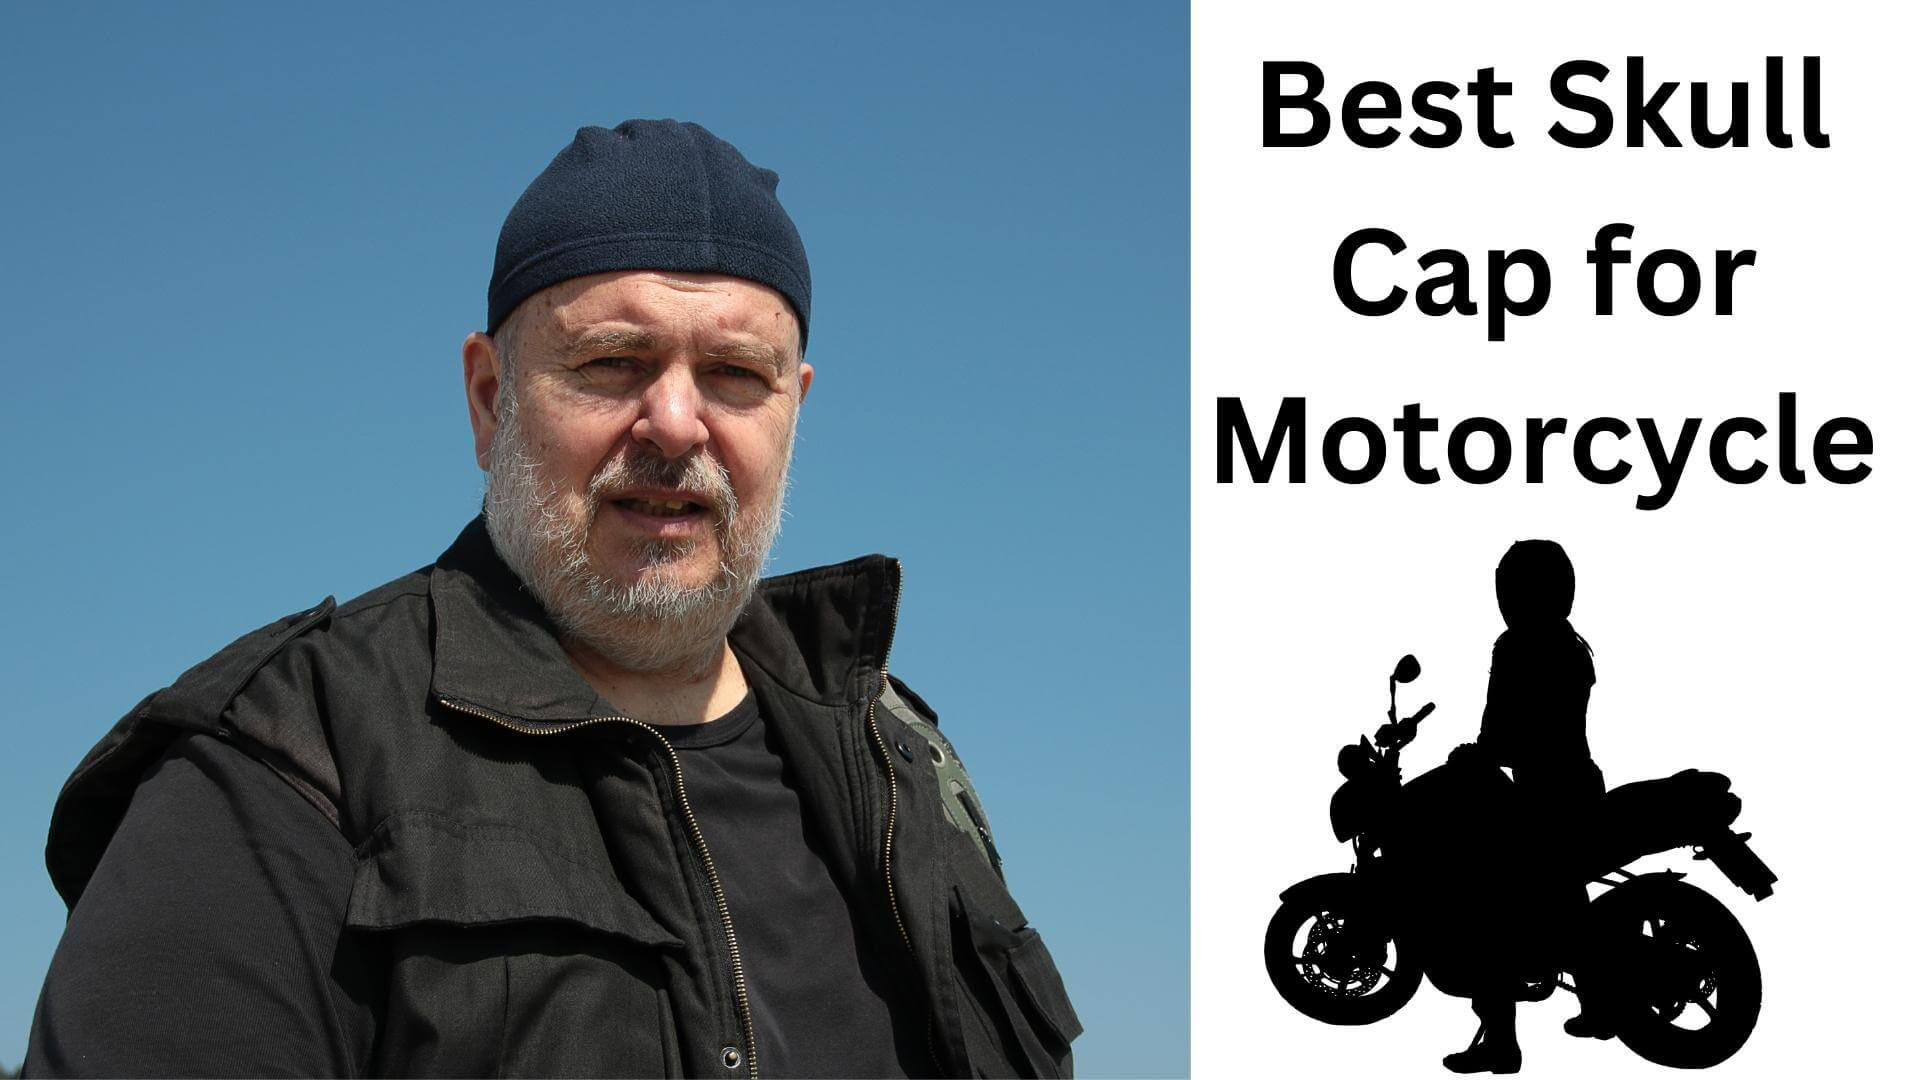 The 10 Best Skull Cap For Motorcycle Riding